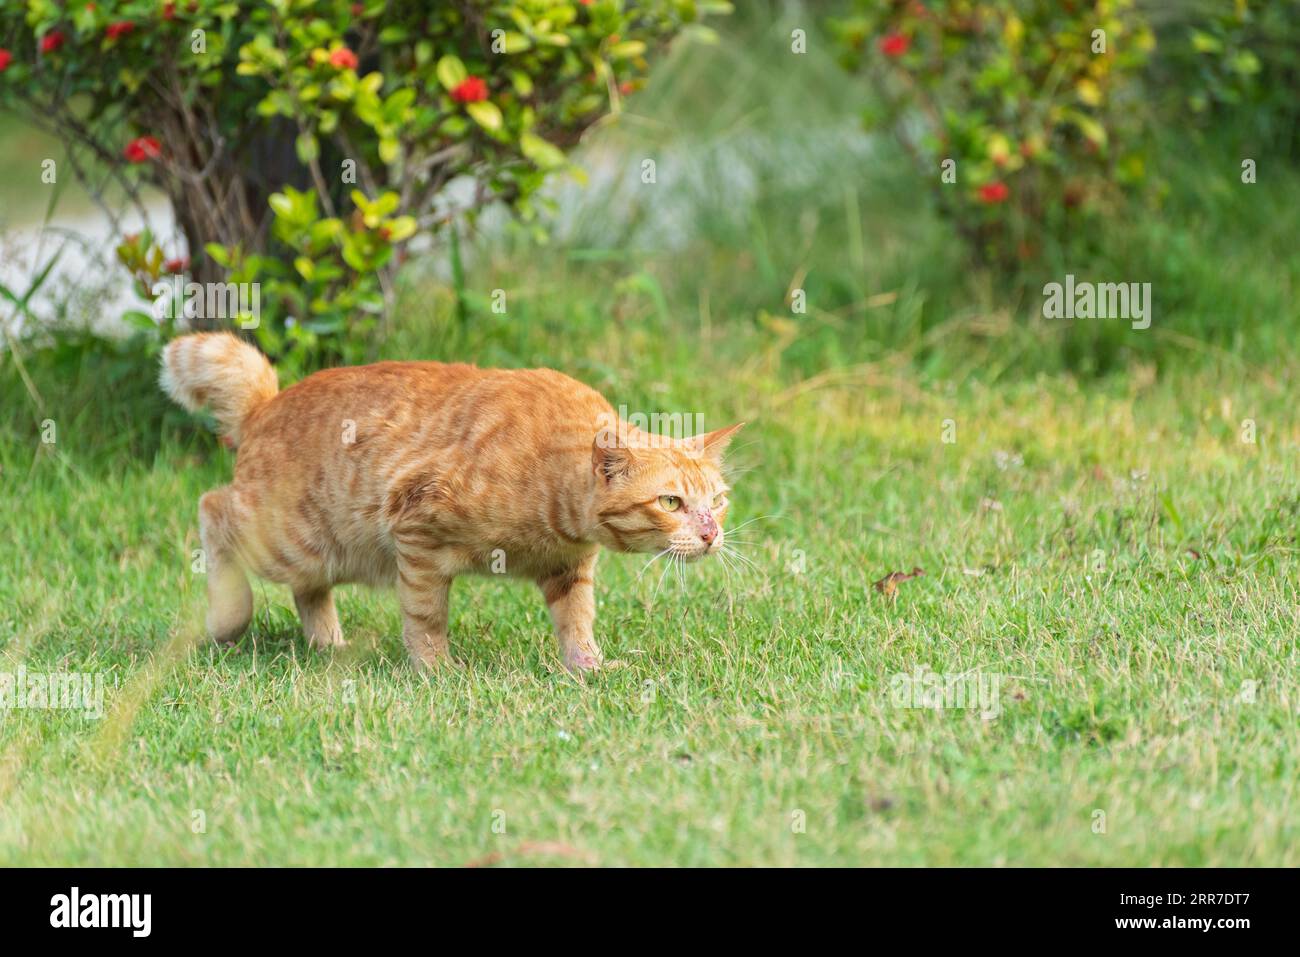 The ginger cat prowls aggressively (he sees another male) showing territorial behavior. Stock Photo